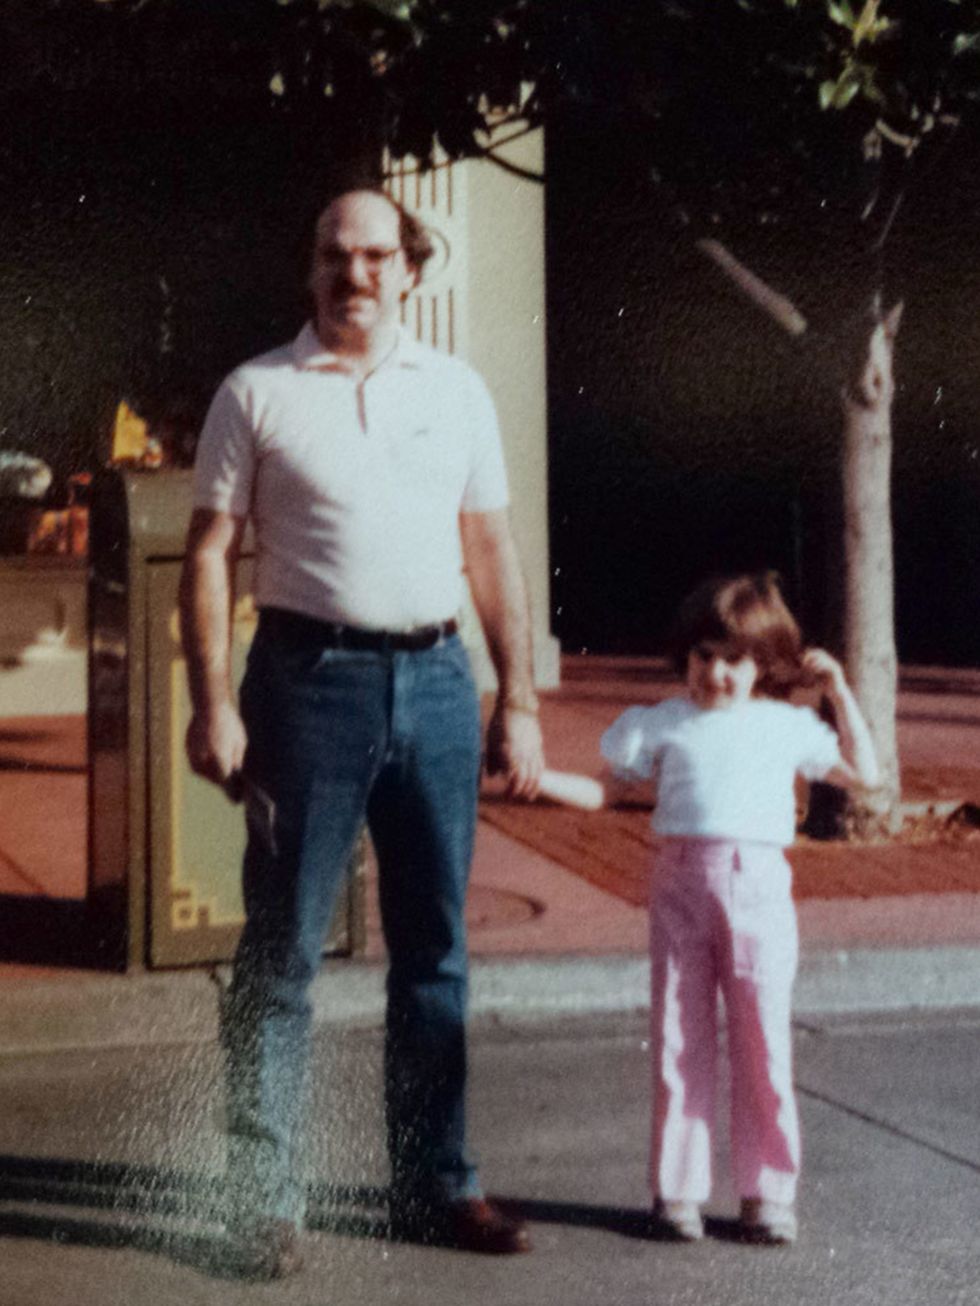 <p>#mydadthefeminist raised four daughters: taught us to dream big, to be financially independent, and to never, ever, take crap from anyone.</p>

<p>- Christina Simone, Workflow Director, @ChrissyJSimone</p>